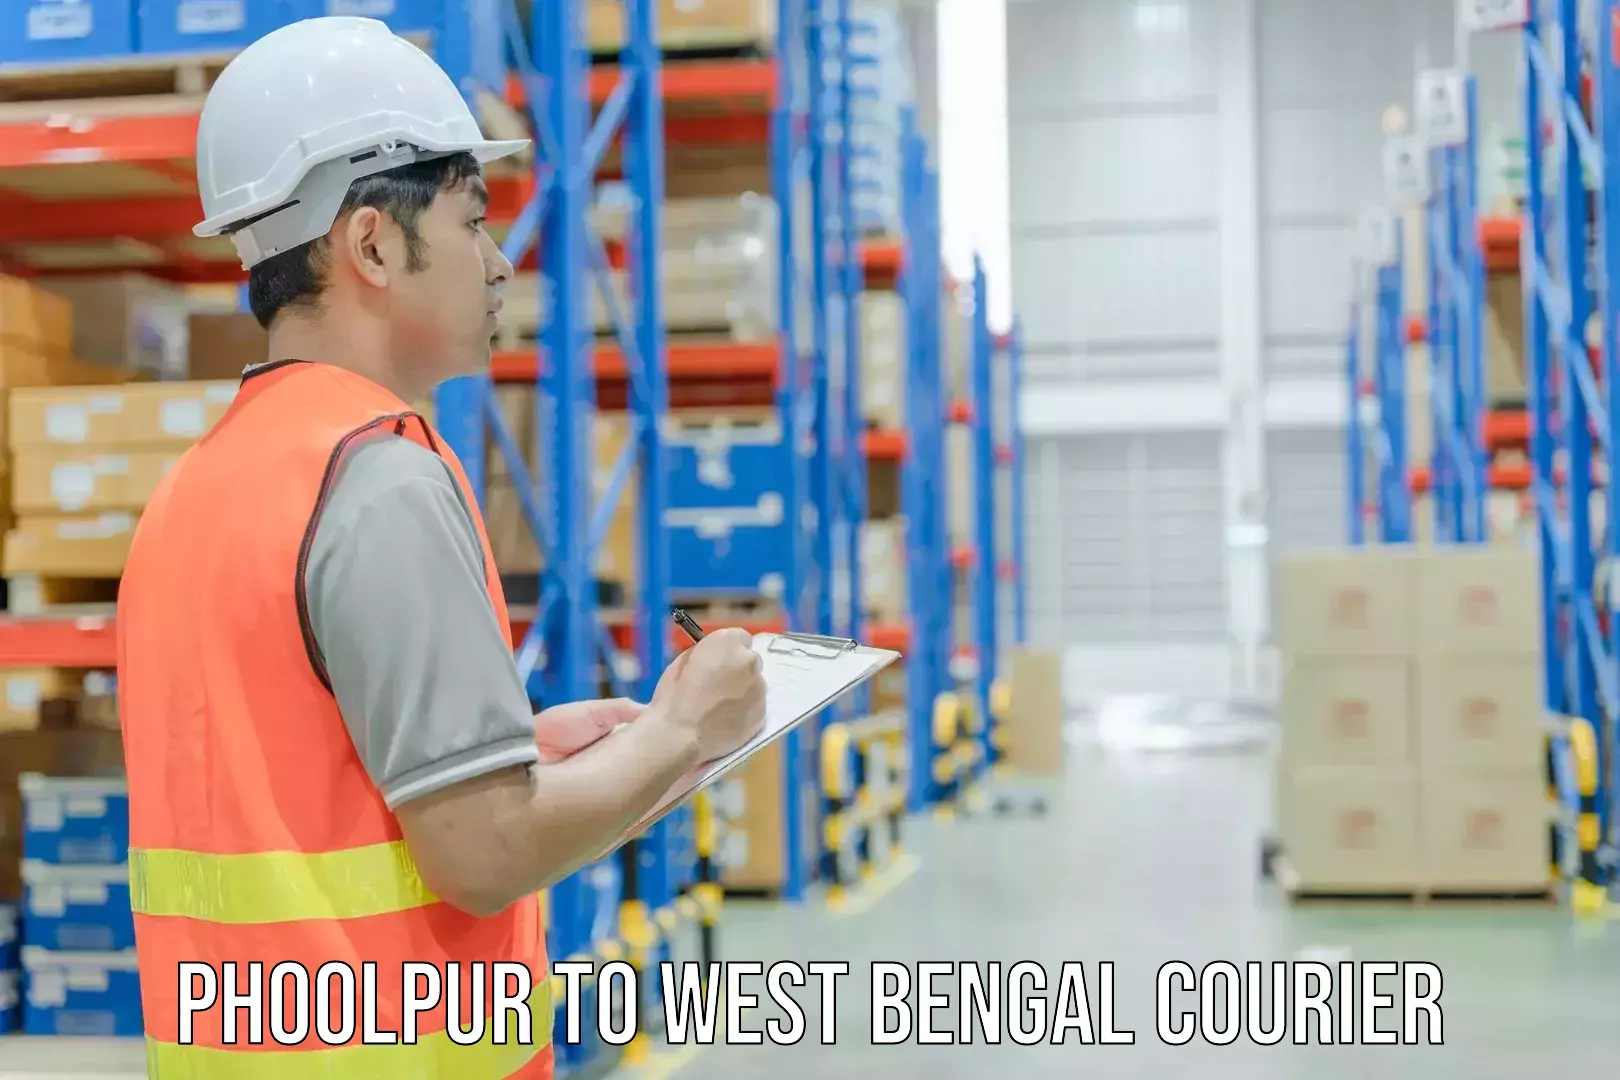 Express shipping Phoolpur to West Bengal